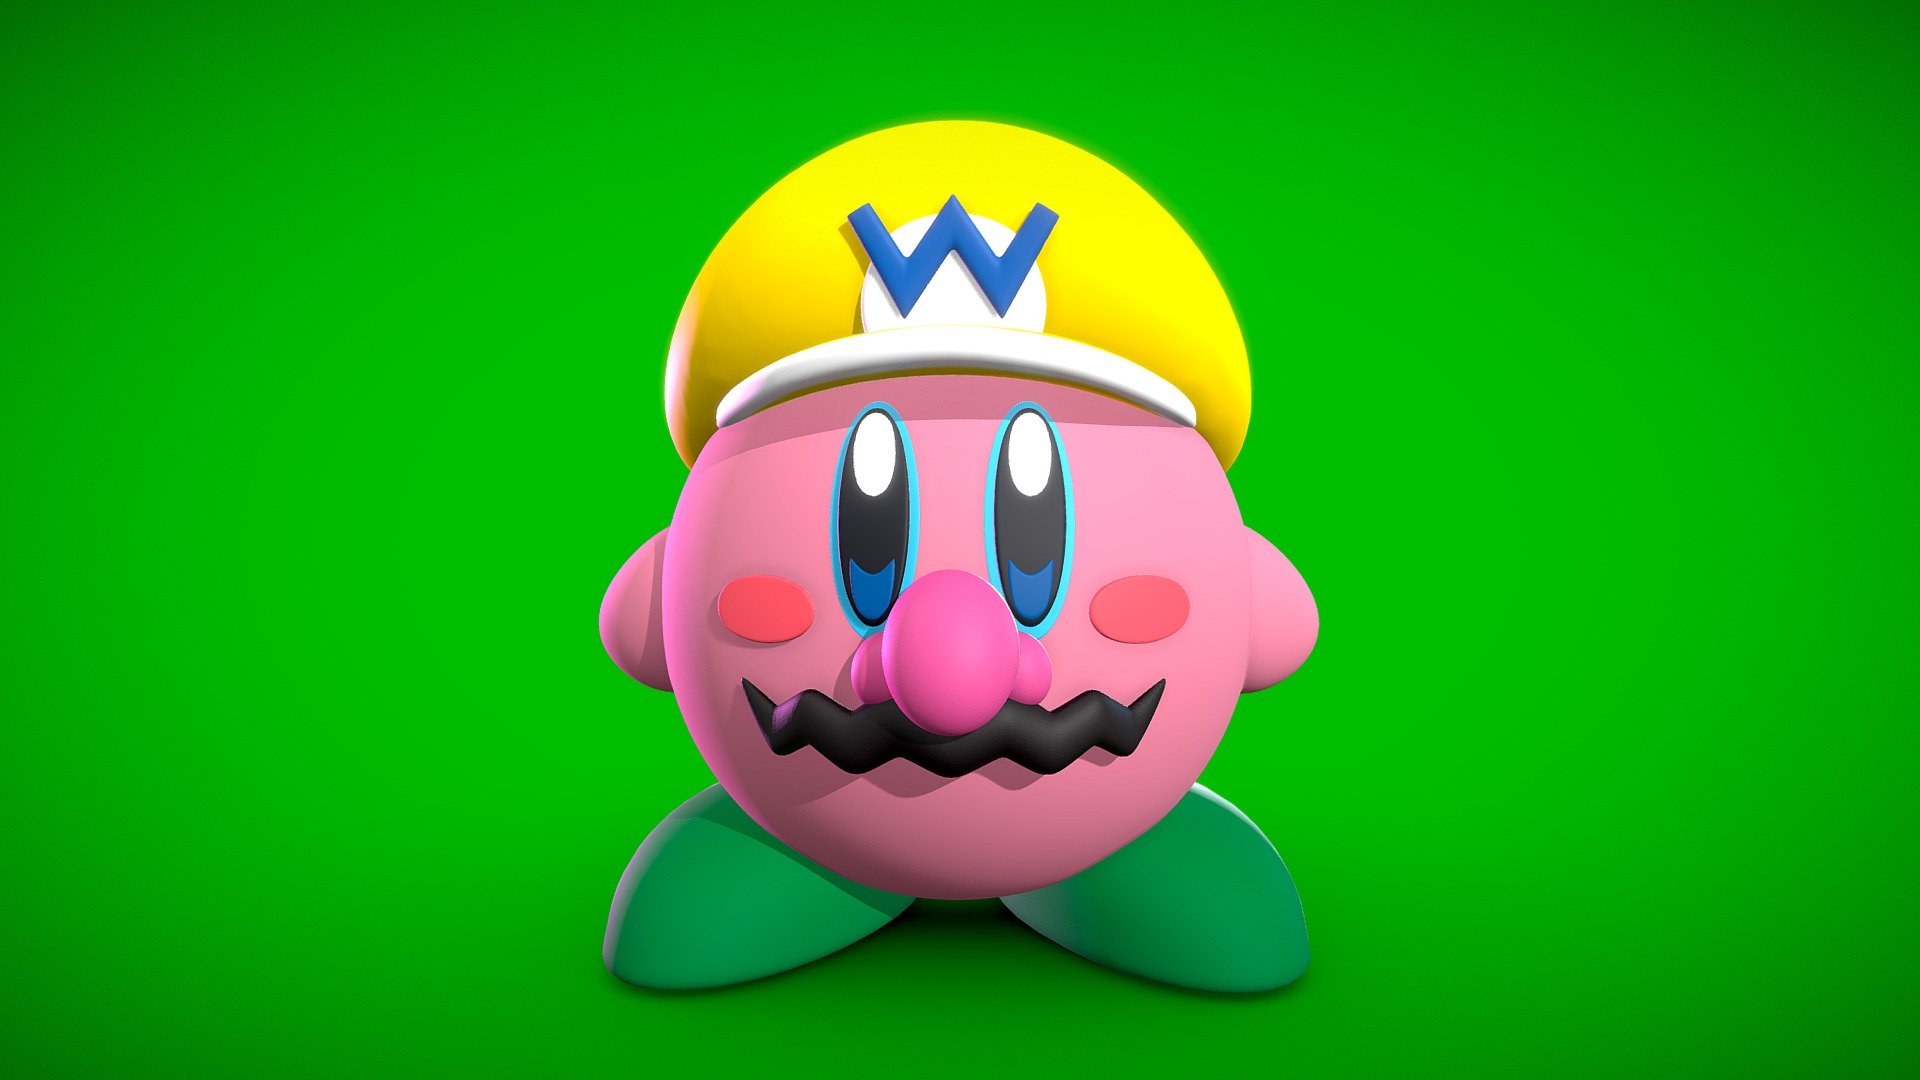 Kirby Transformed into Wario.

Image Gallery

This model is part of the Kirby/Mario crossover collection. See other models from this collection:




Mario Kirby: https://skfb.ly/o986y

Luigi Kirby: https://skfb.ly/ounWs

Princess Peach Kirby : https://skfb.ly/oupnF

Bowser Kirby: https://skfb.ly/ou6X7

Wario Kirby: https://skfb.ly/ouK7w

Waluigi: https://skfb.ly/ouMC6
 - Wario Kirby - 3D PRINT - Buy Royalty Free 3D model by LessaB3D 3d model